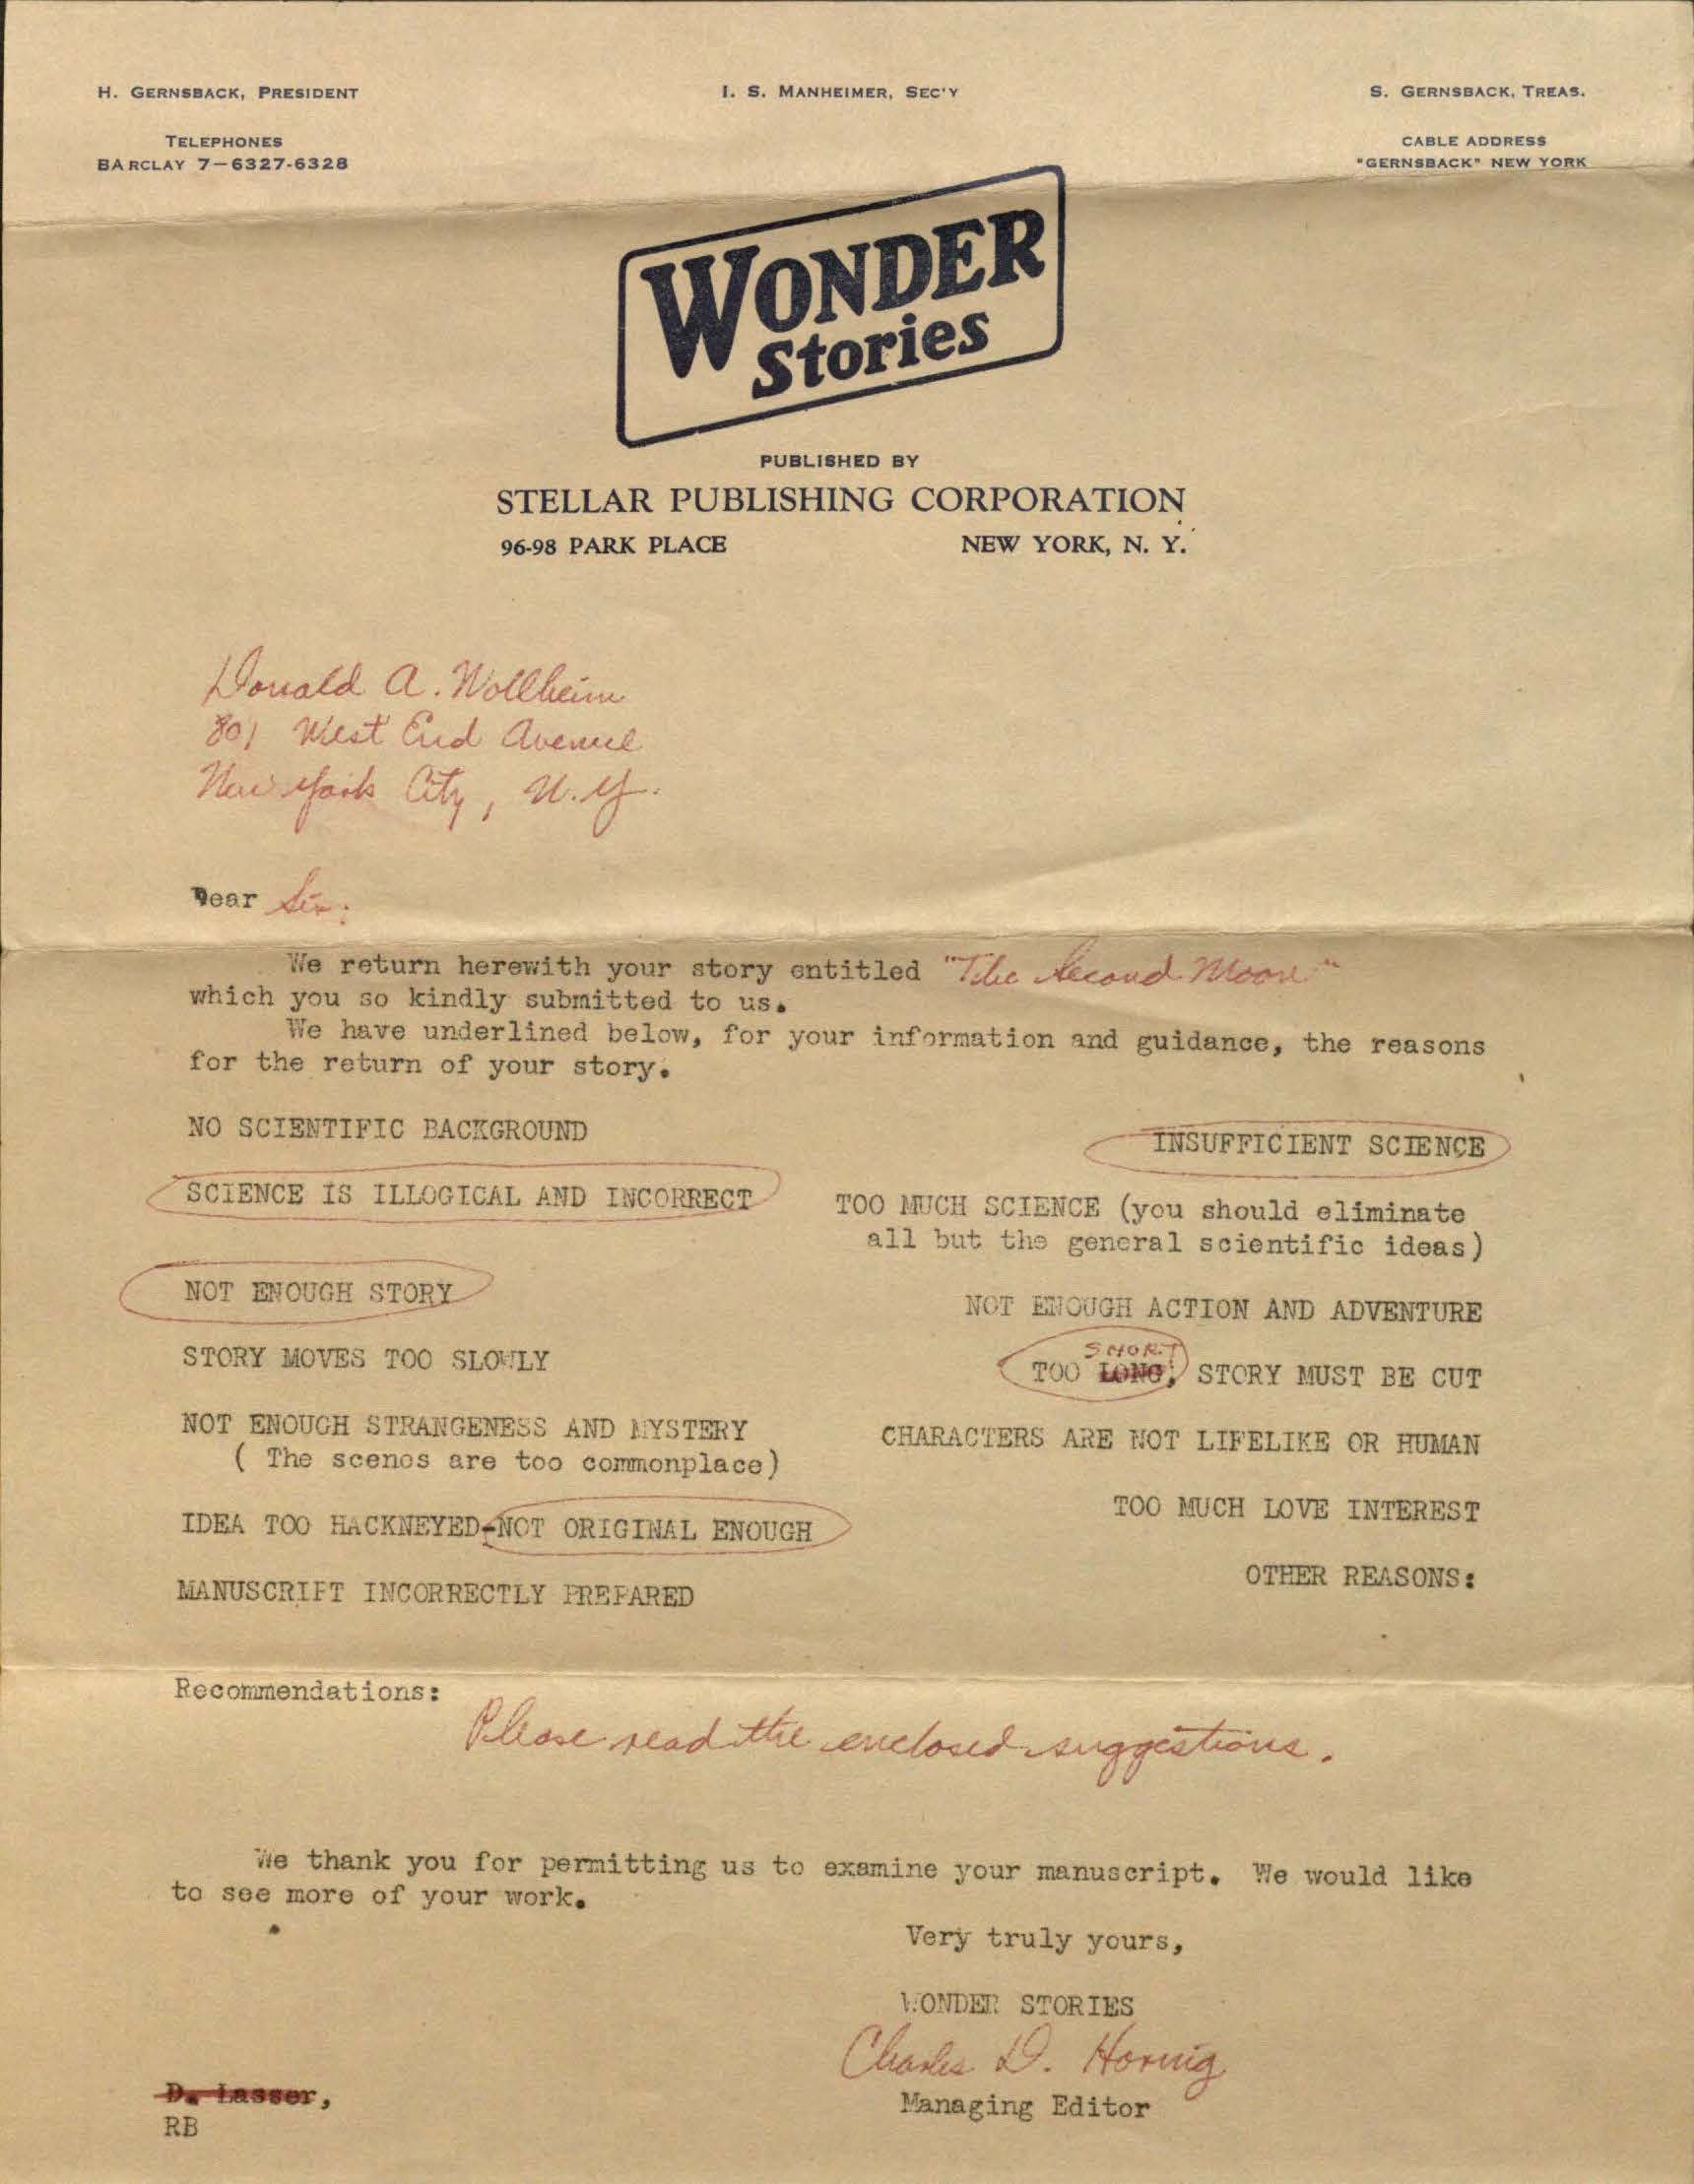 Image of Wonder Stories' form rejection letter for Wollheim's "The Second Moon", [1933]